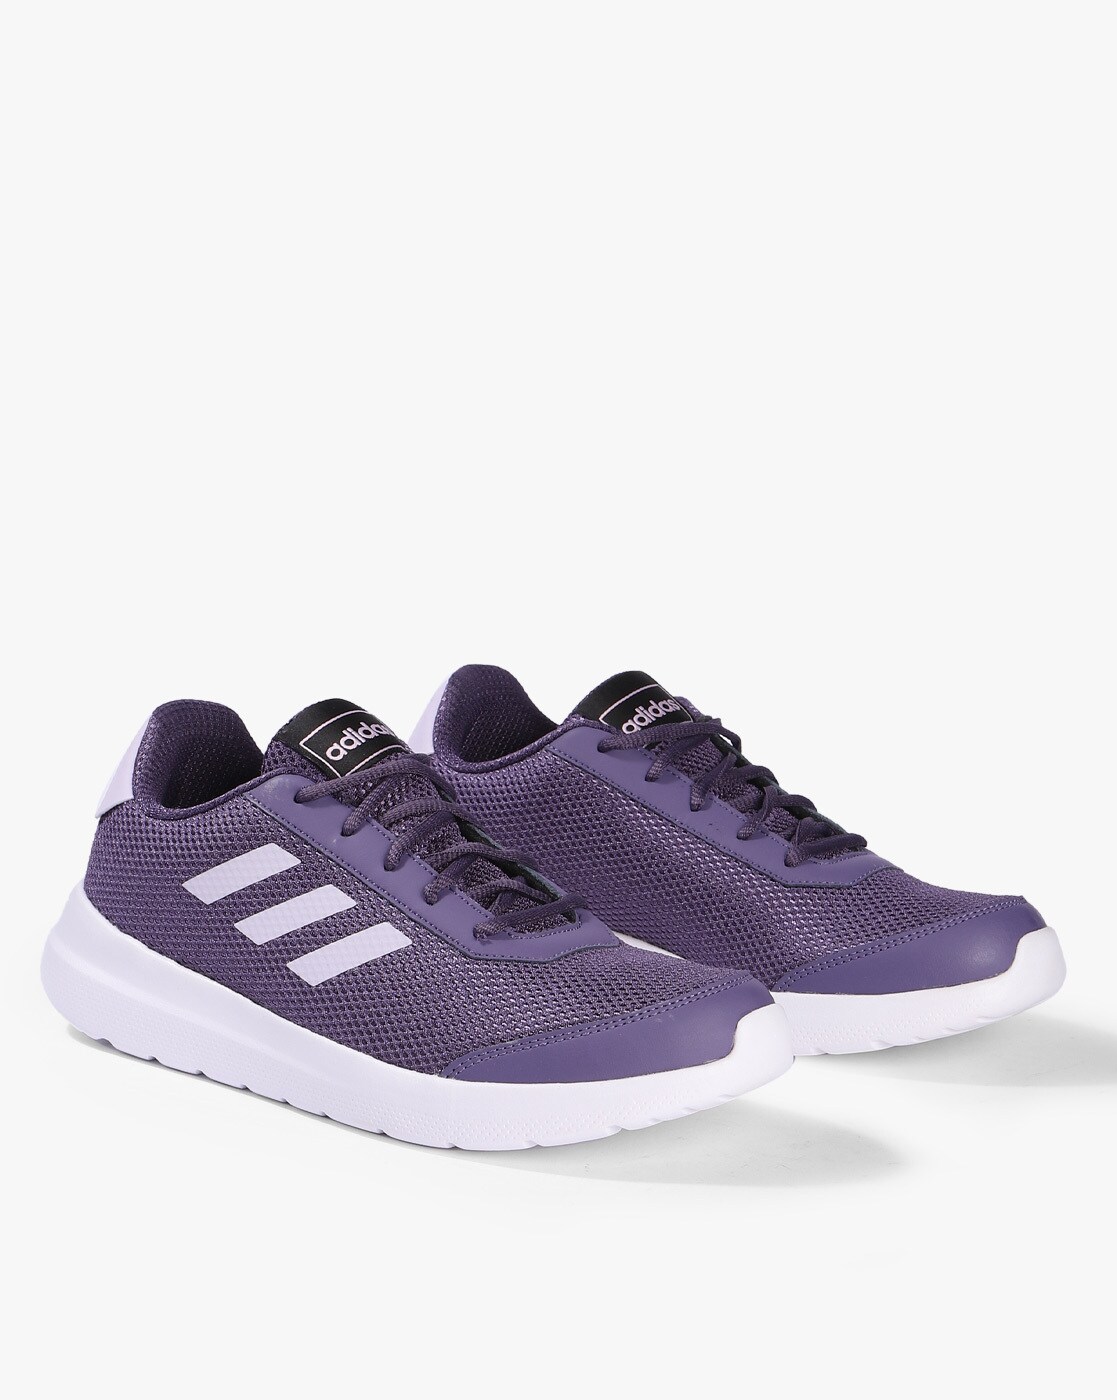 adidas shoes with purple stripes